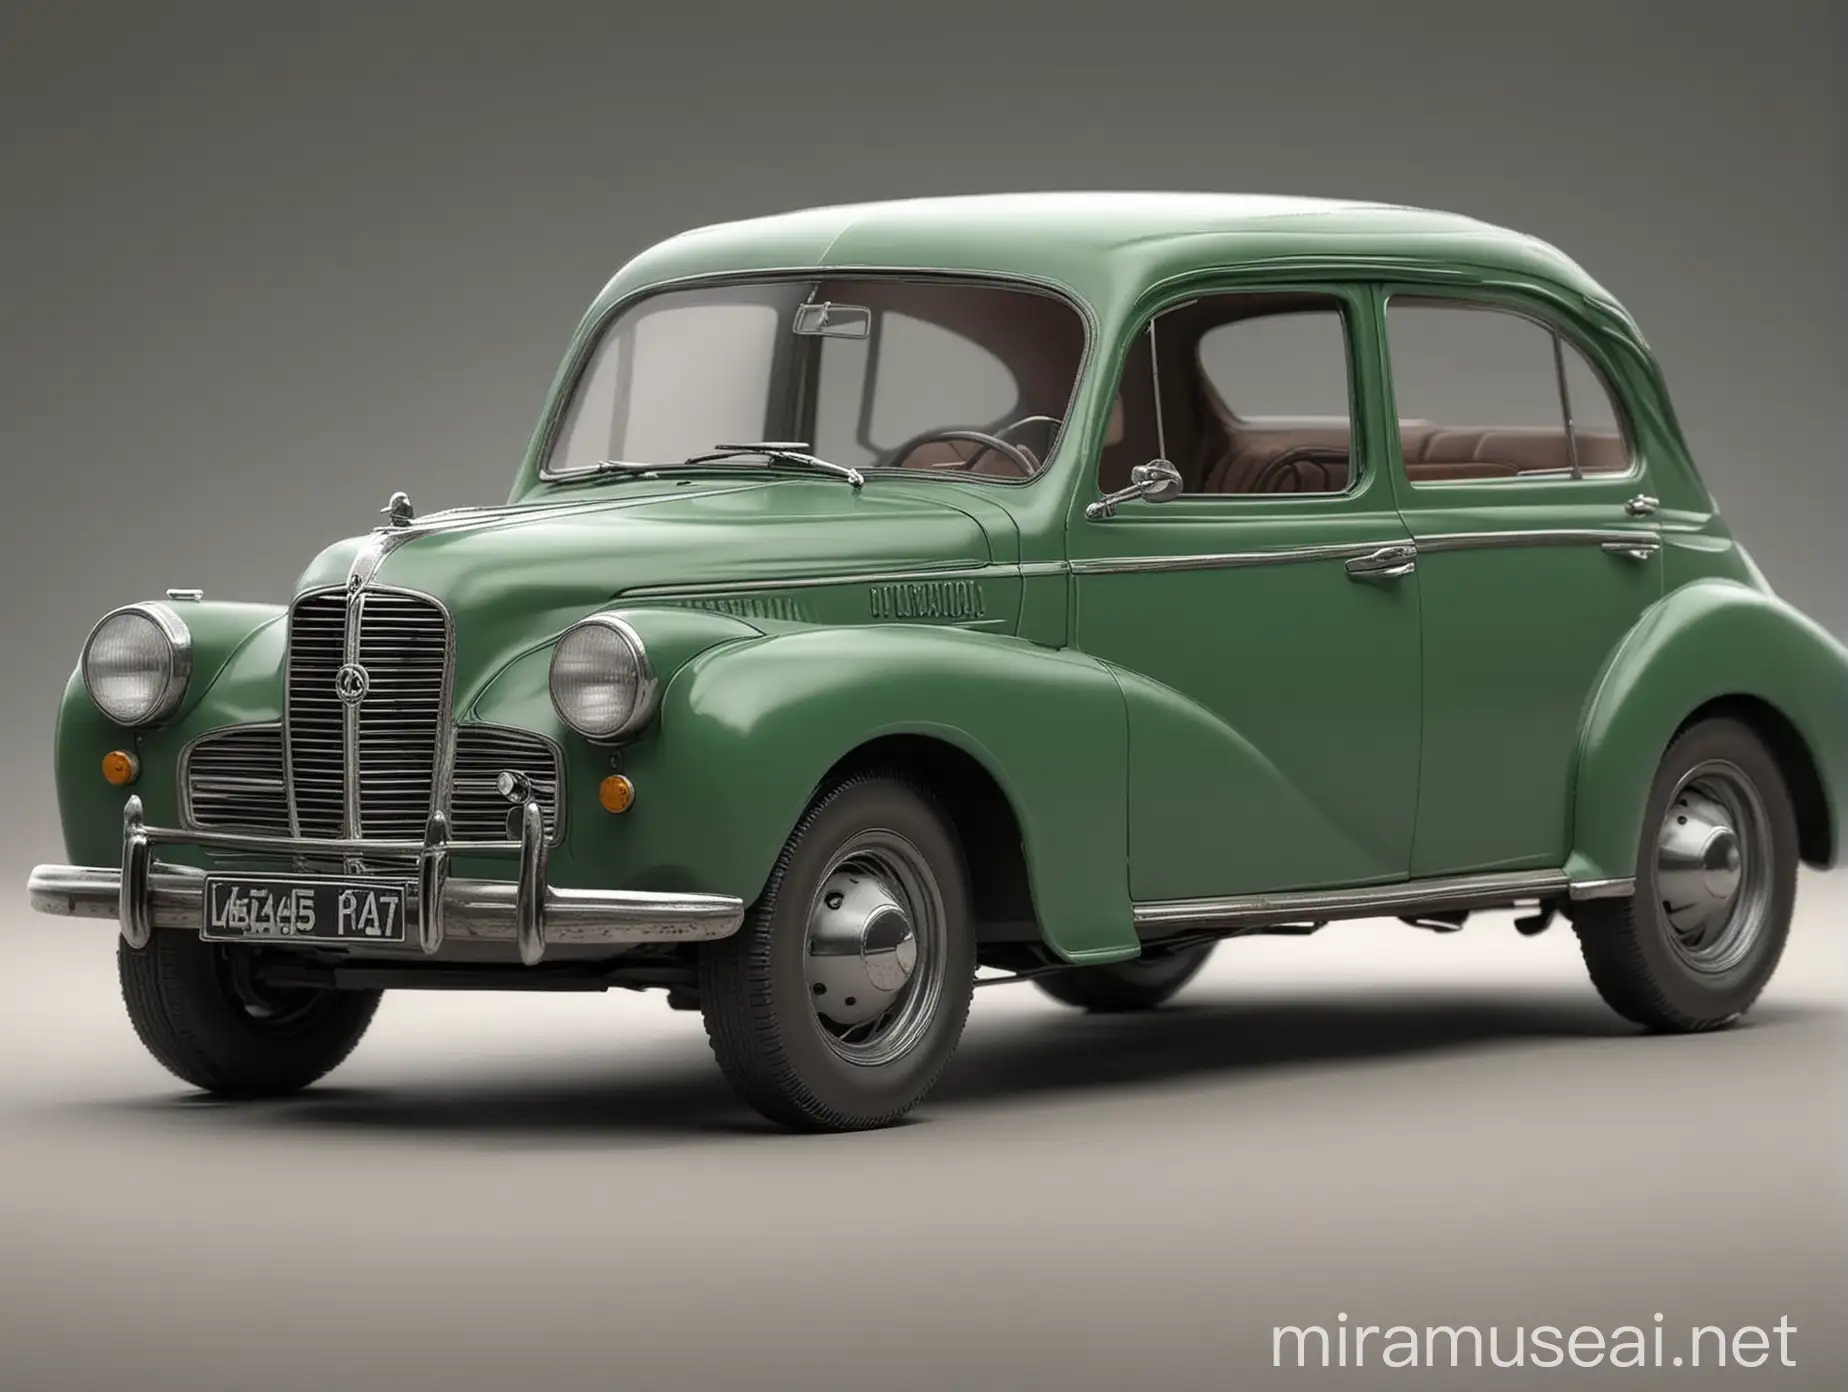 Make this 1940's model of opel kadett more detailed, realistic, make it a color picture, 8k